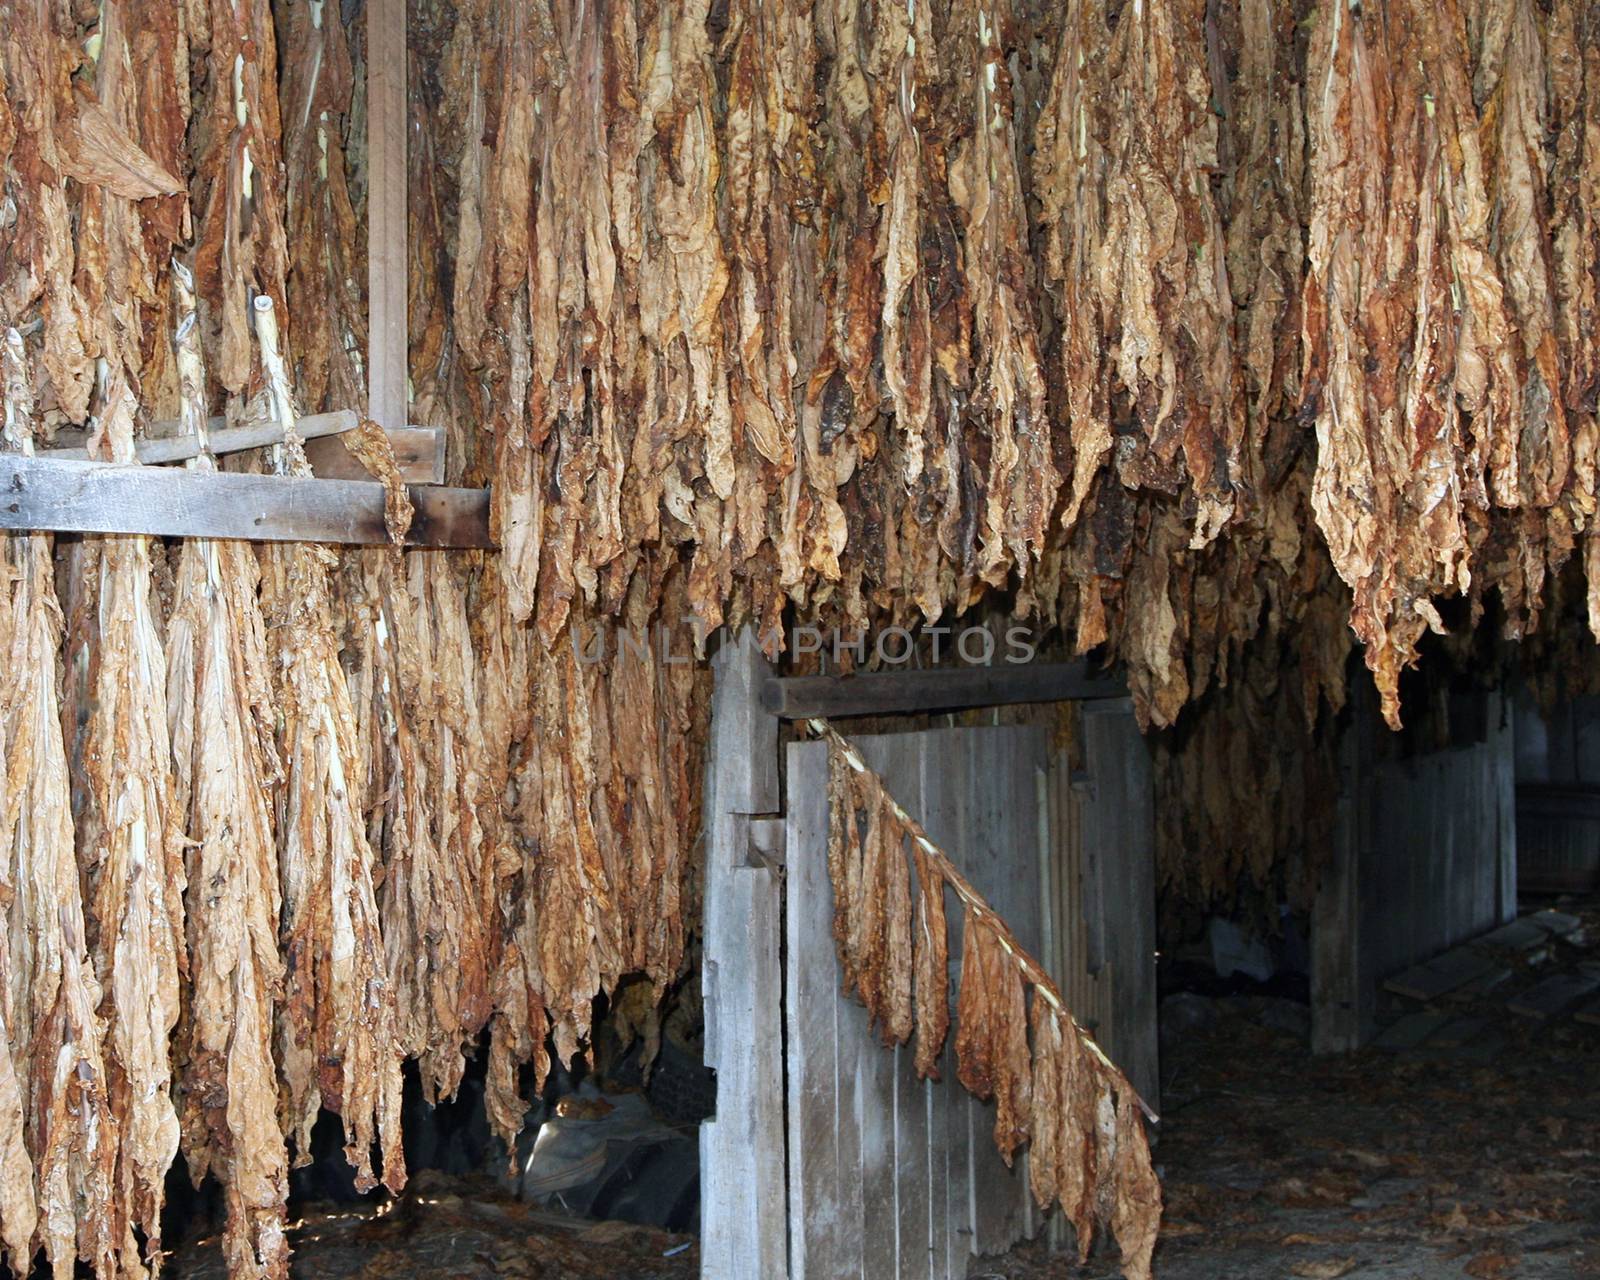 Freshly harvested tobacco dries in a barn before further processing.